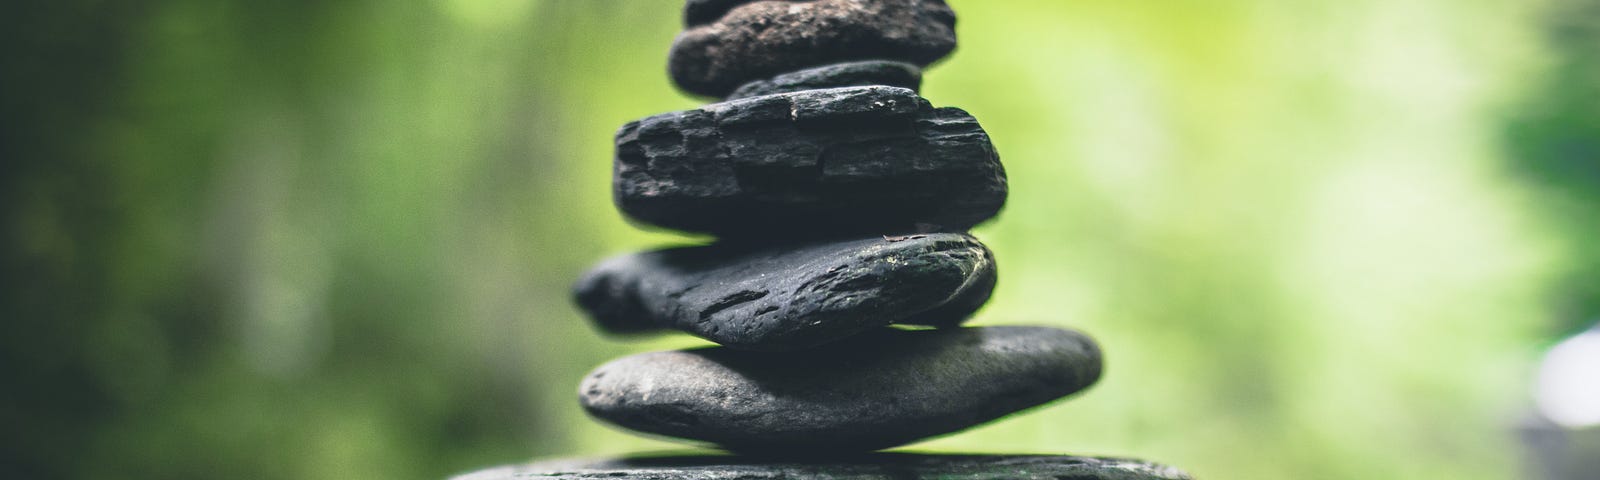 A Zen pile of stones set among nature, representing the witness that observes the ego.